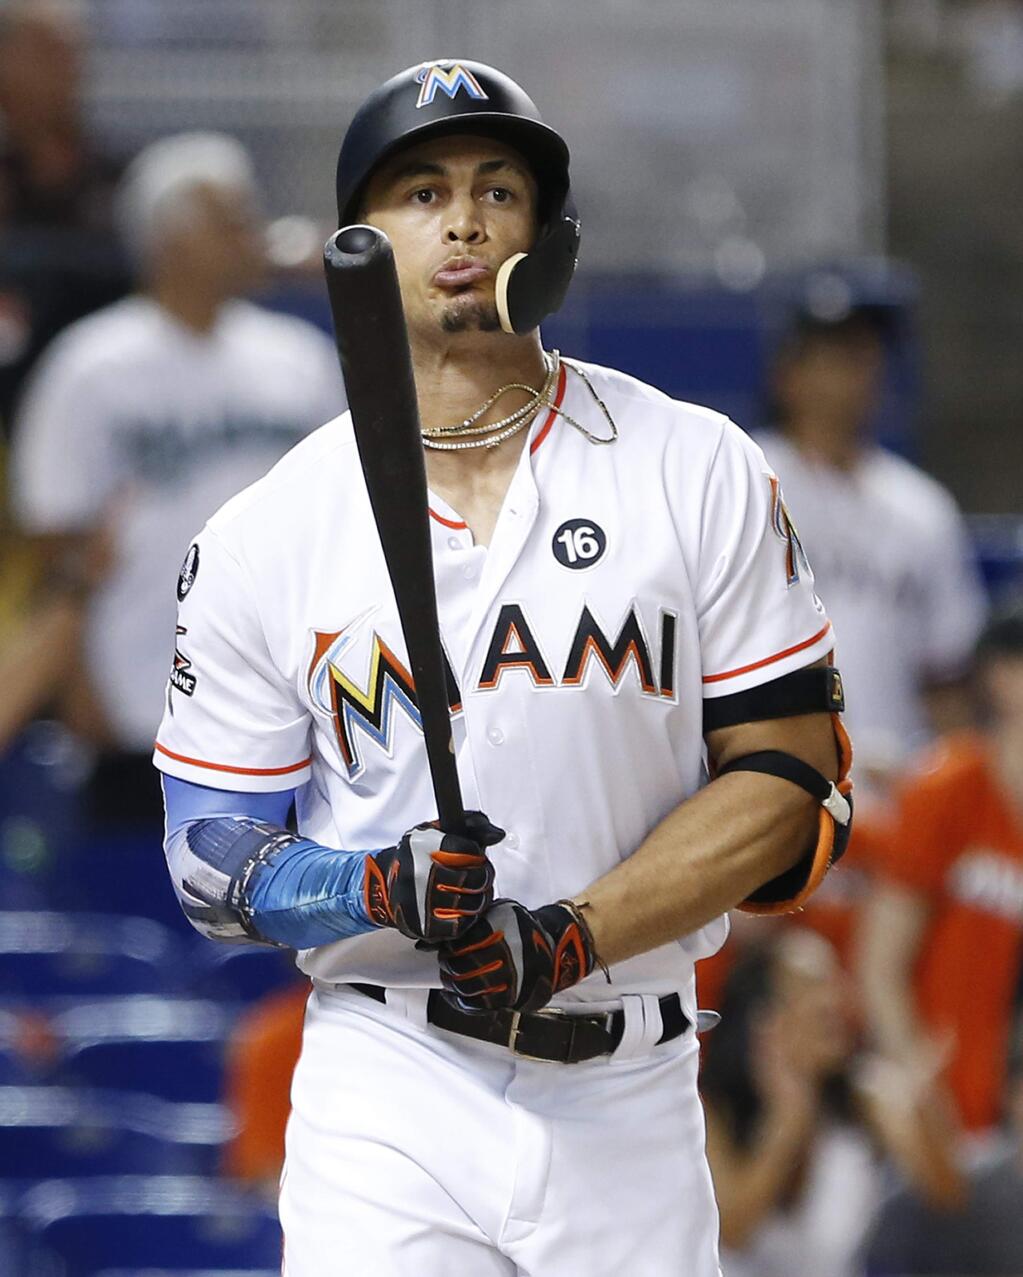 In this Thursday, Aug. 31, 2017 file photo, Miami Marlins' Giancarlo Stanton reacts after he flies out during the ninth inning against the Philadelphia Phillies in Miami. (AP Photo/Wilfredo Lee, File)